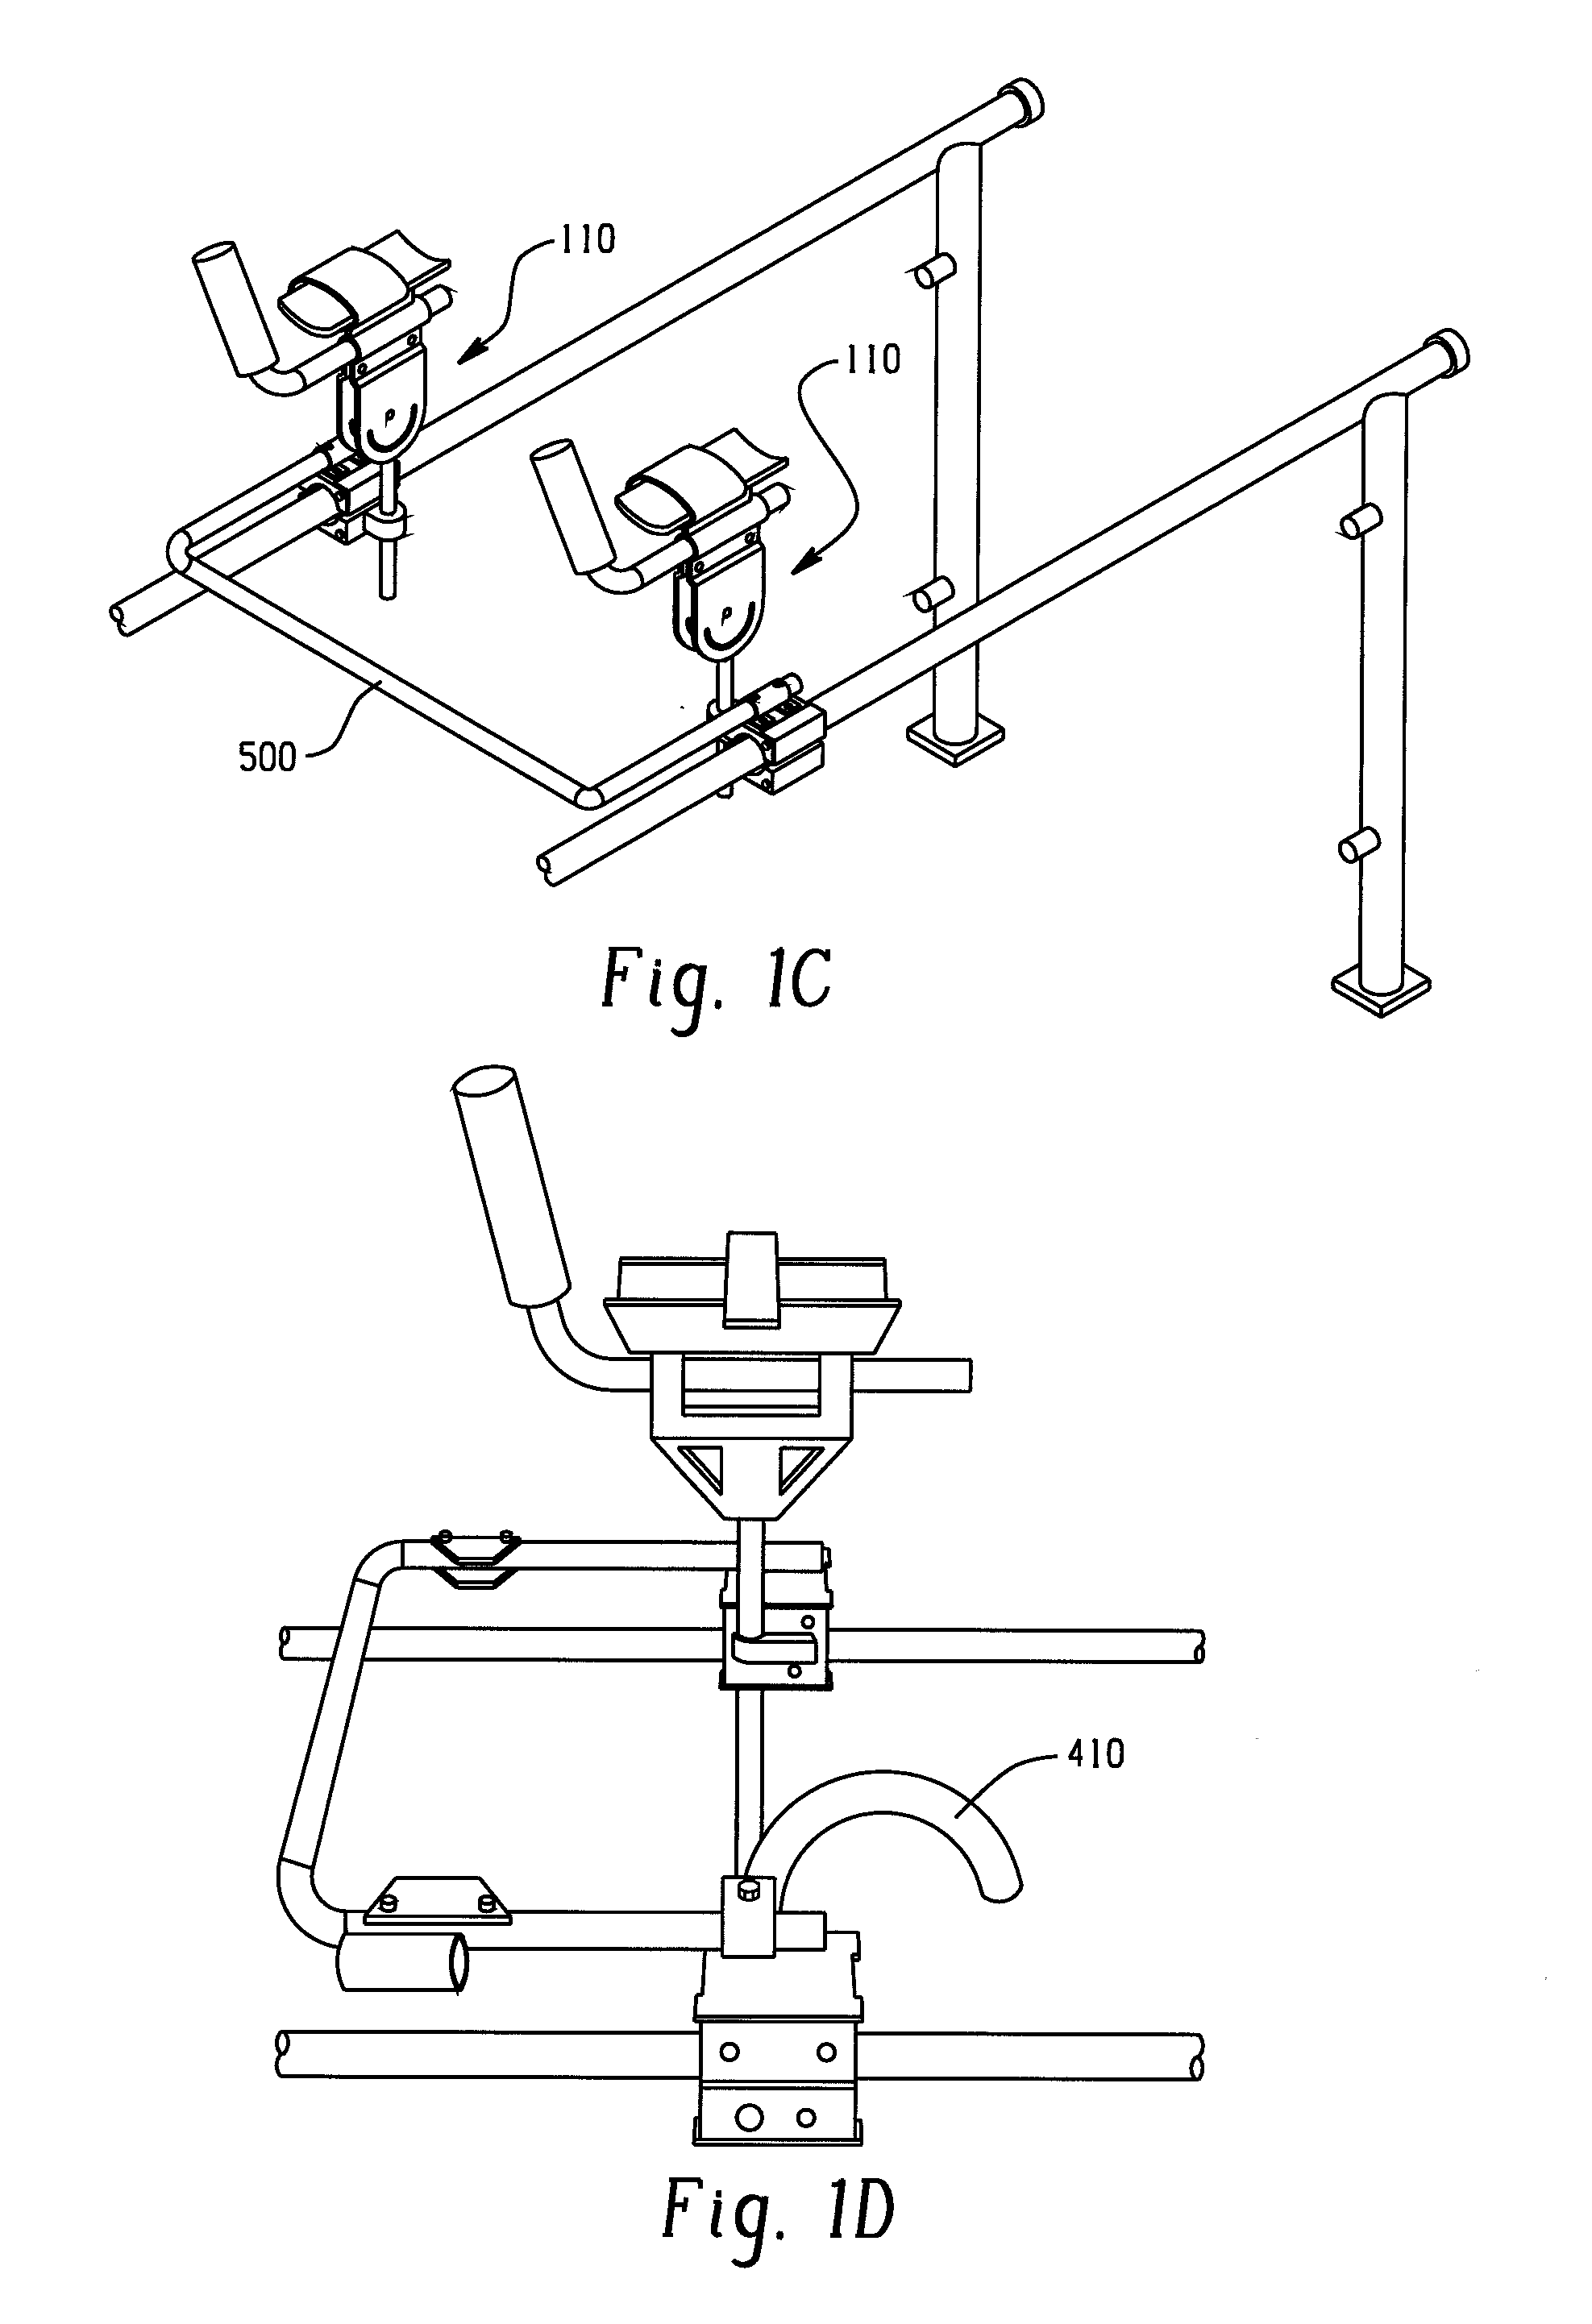 Patient aid devices, particularly for mobile upper extremity support in railed devices such as parallel bars and treadmills